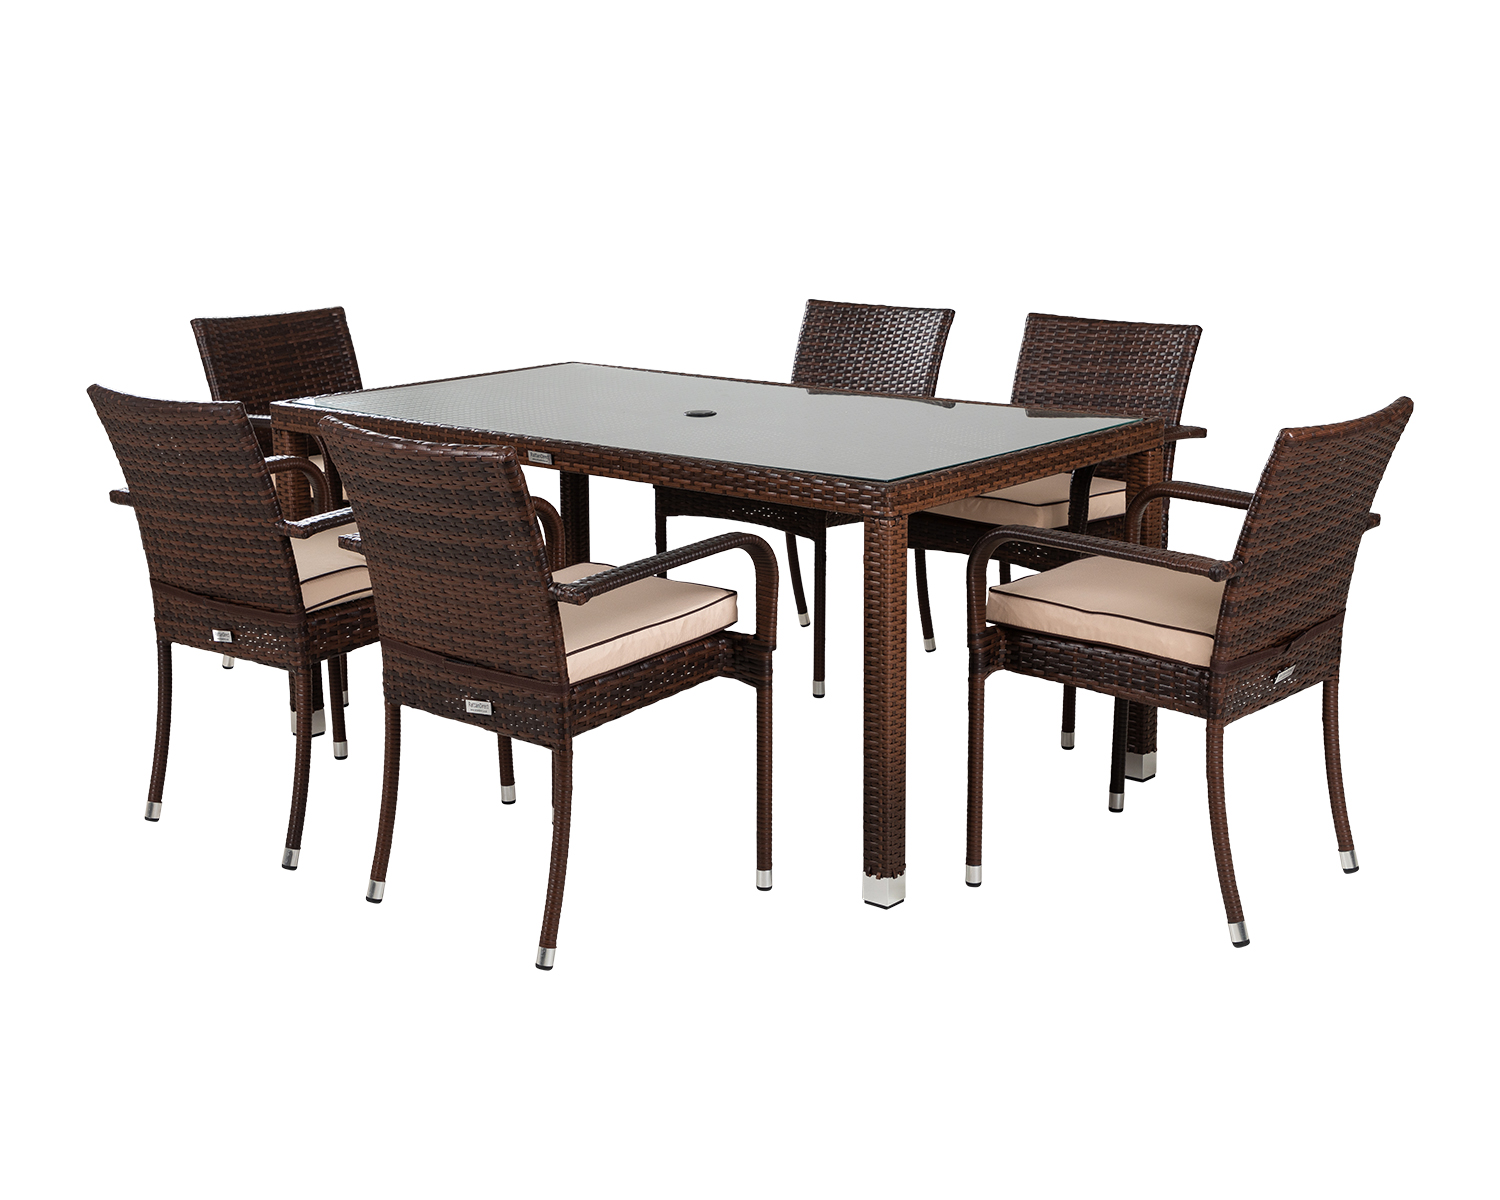 6 Seat Rattan Garden Dining Set With Open Leg Rectangular Dining Table In Brown Roma Rattan Direct